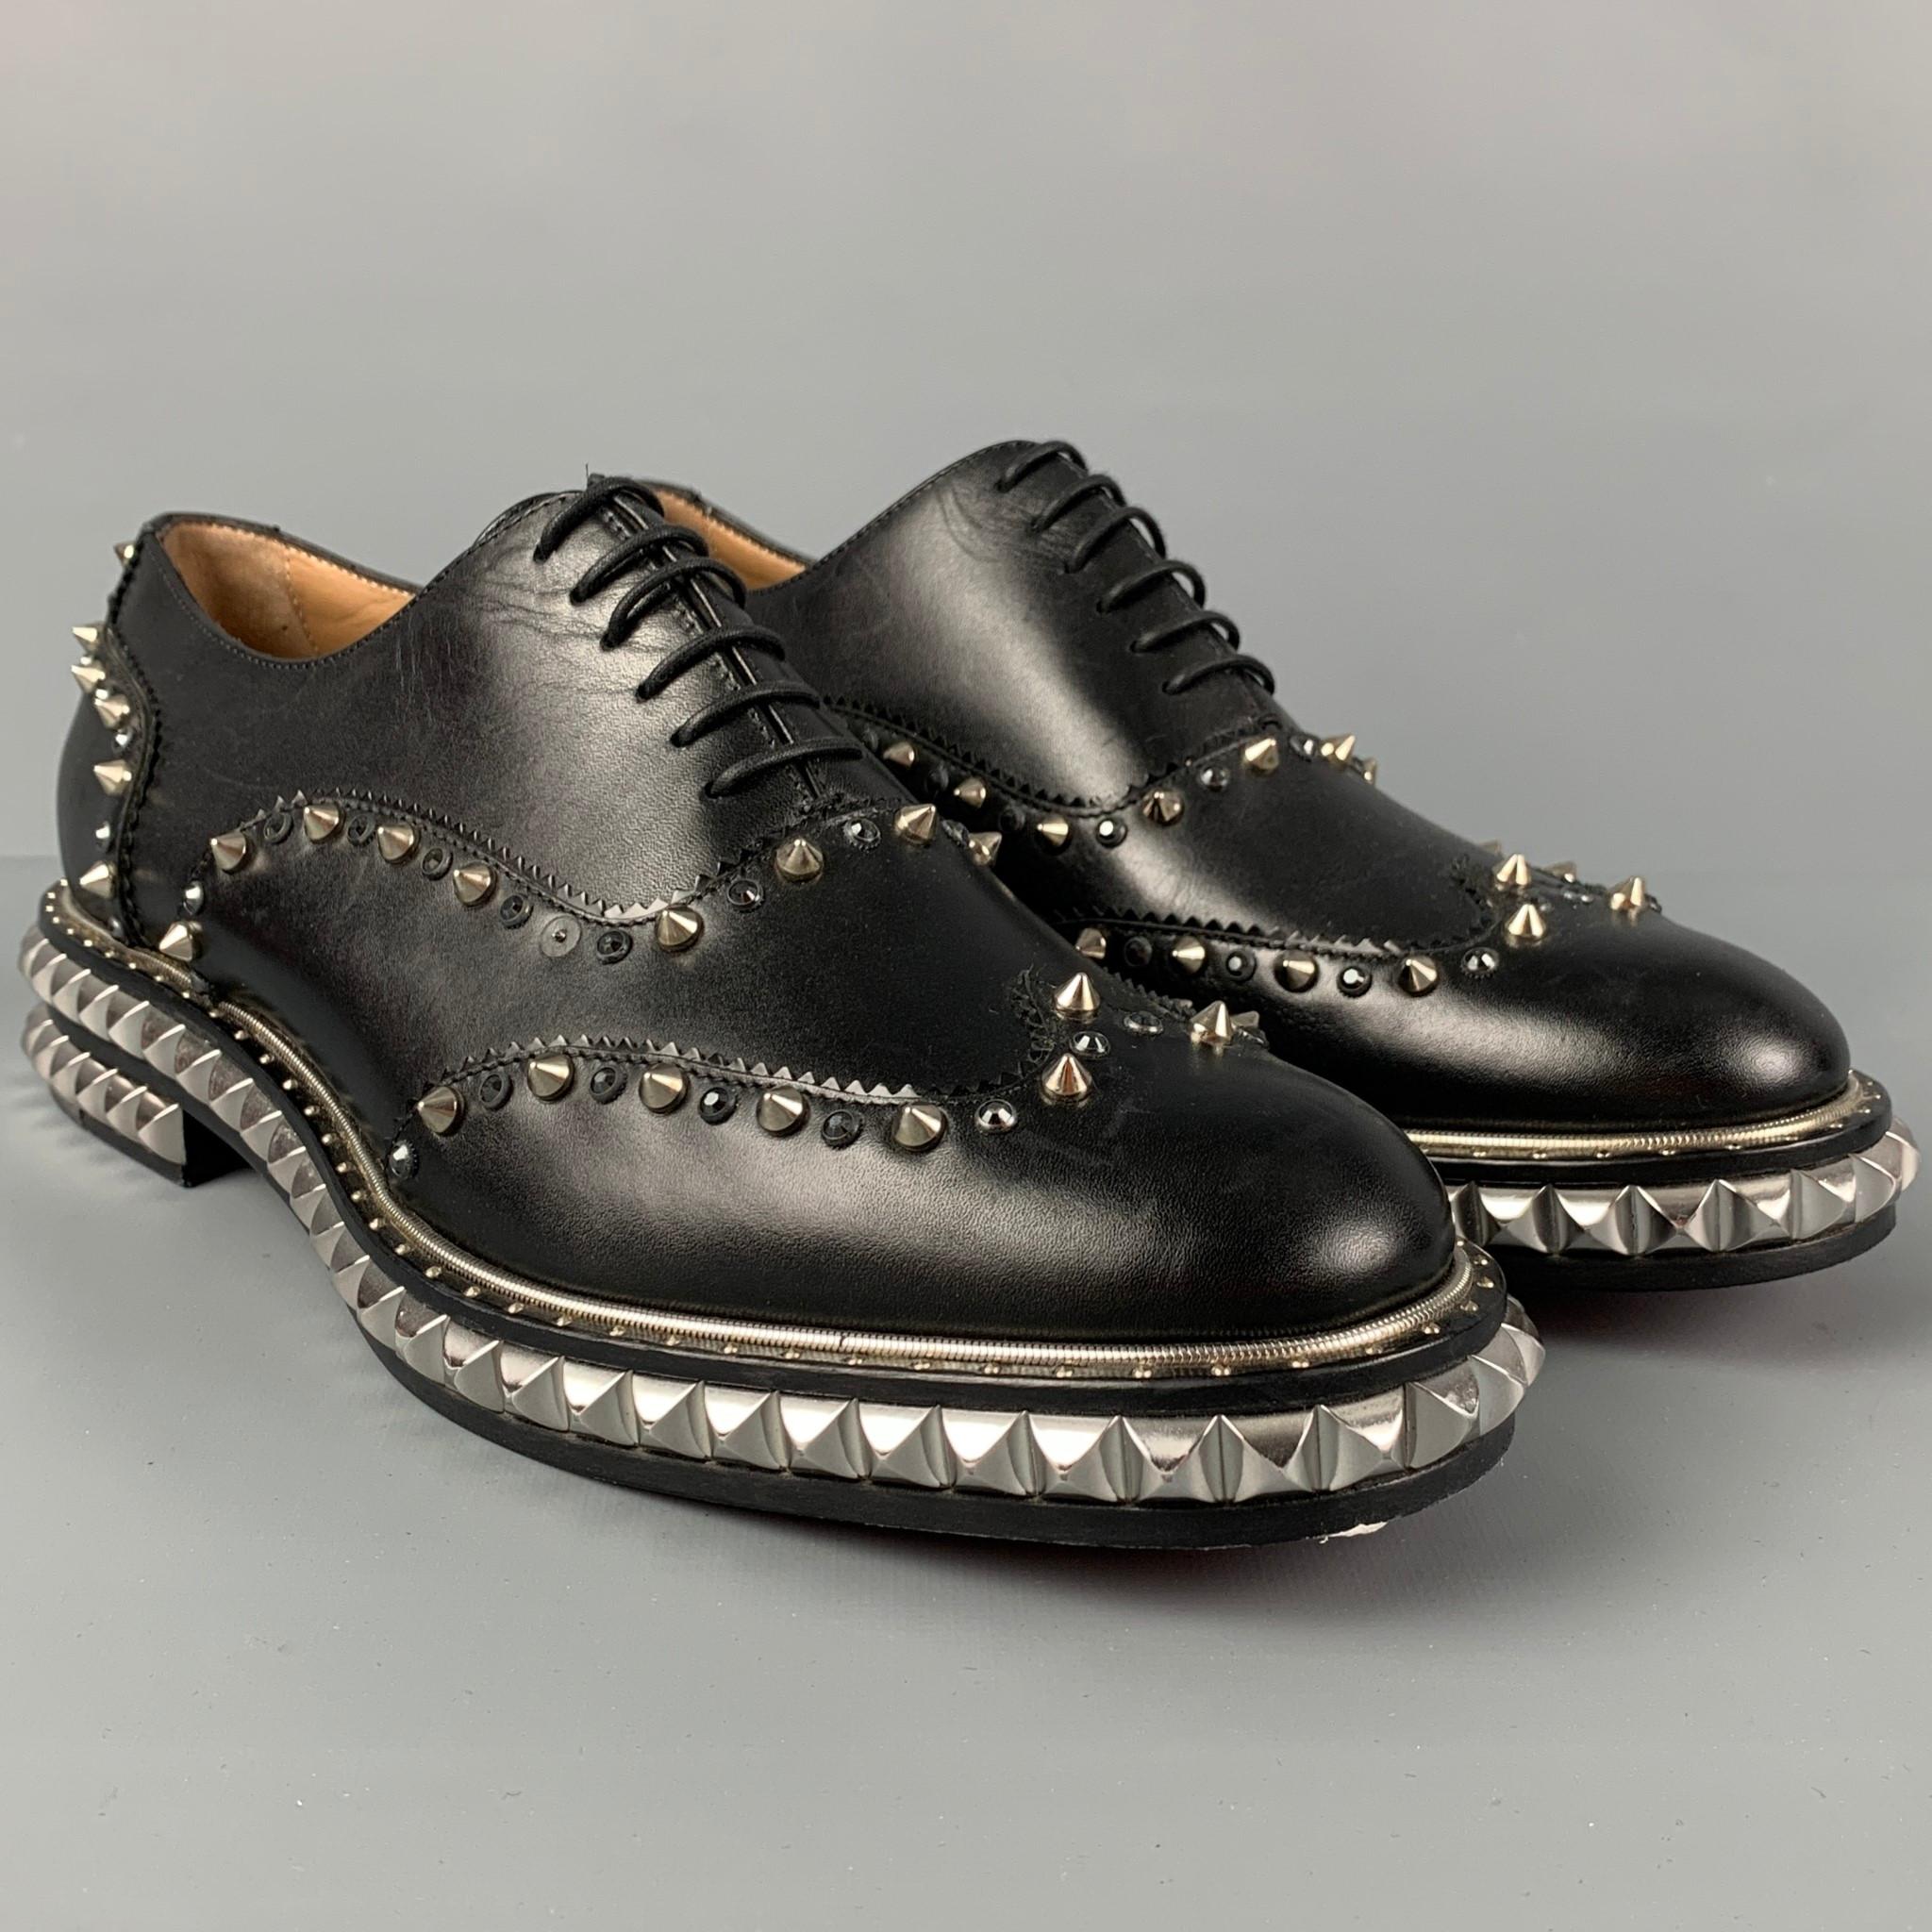 CHRISTINA LOUBOUTIN shoes comes in a black leather featuring studded details, wingtip style, signature red sole, and a lace up closure. Made in Italy. 

Very Good Pre-Owned Condition.  Minor wear, missing a stud.
Marked: 41

Outsole: 12 in. x 4 in. 